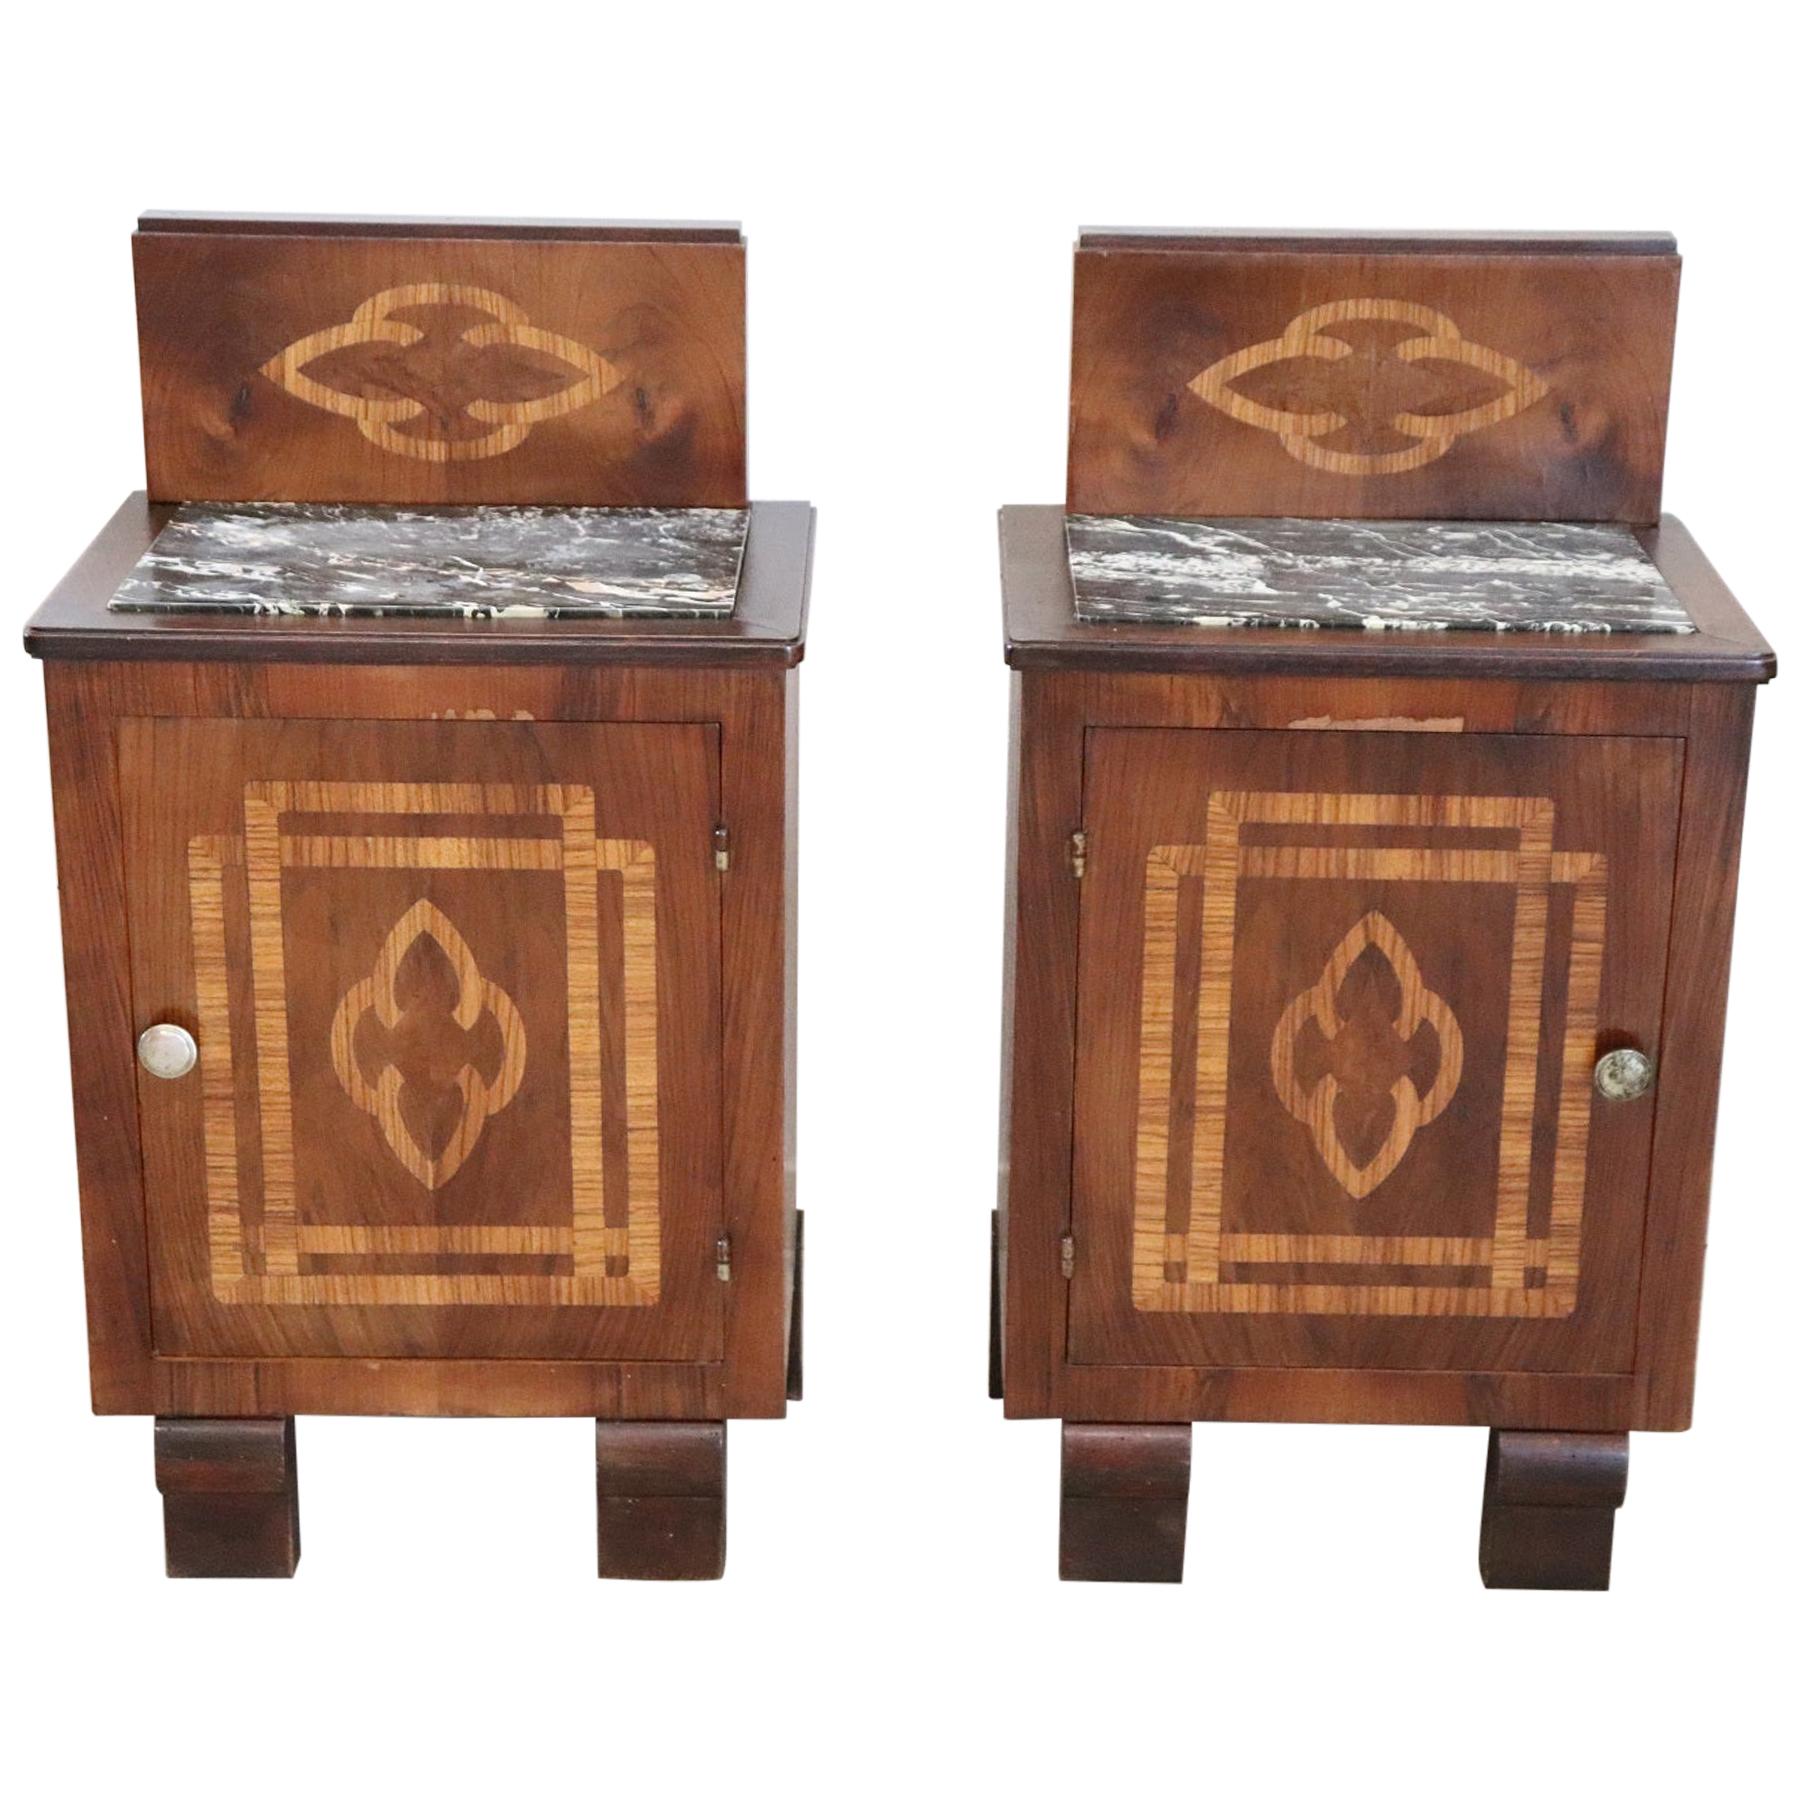 20th Century Italian Art Deco Walnut Inlaid Pair of Nightstands with Marble Top